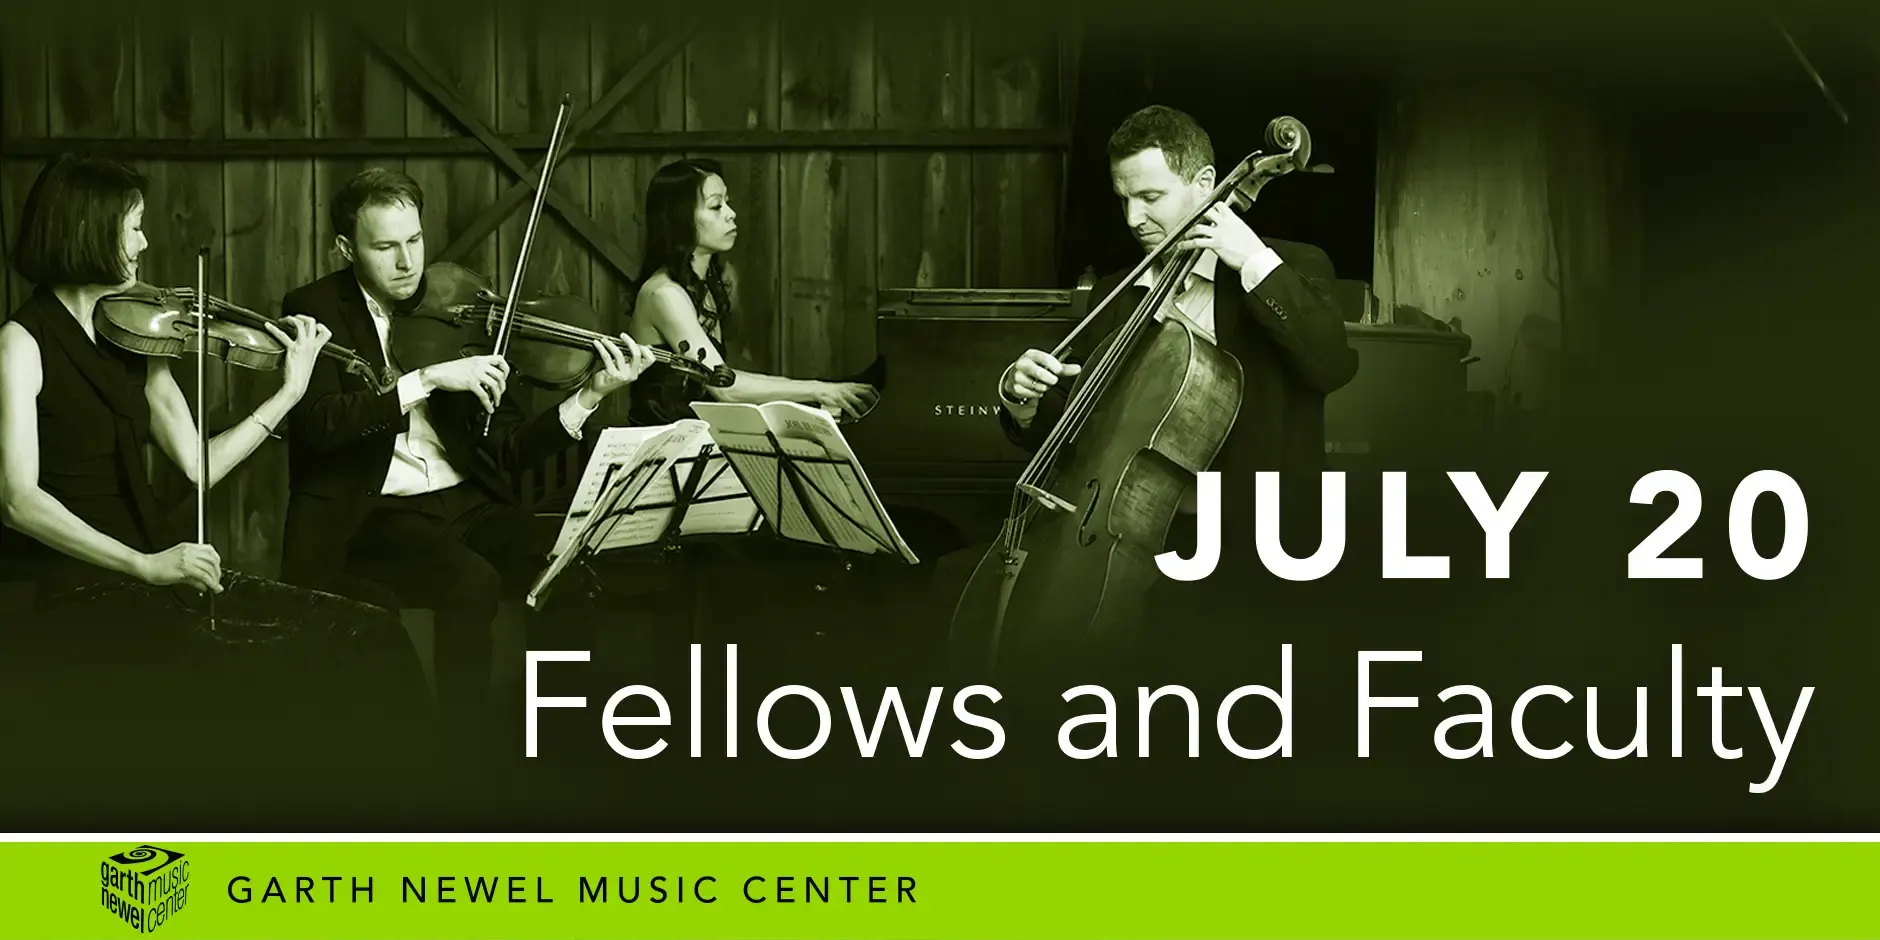 July 20 - Fellows and Faculty - GNPQ and Emerging Artists